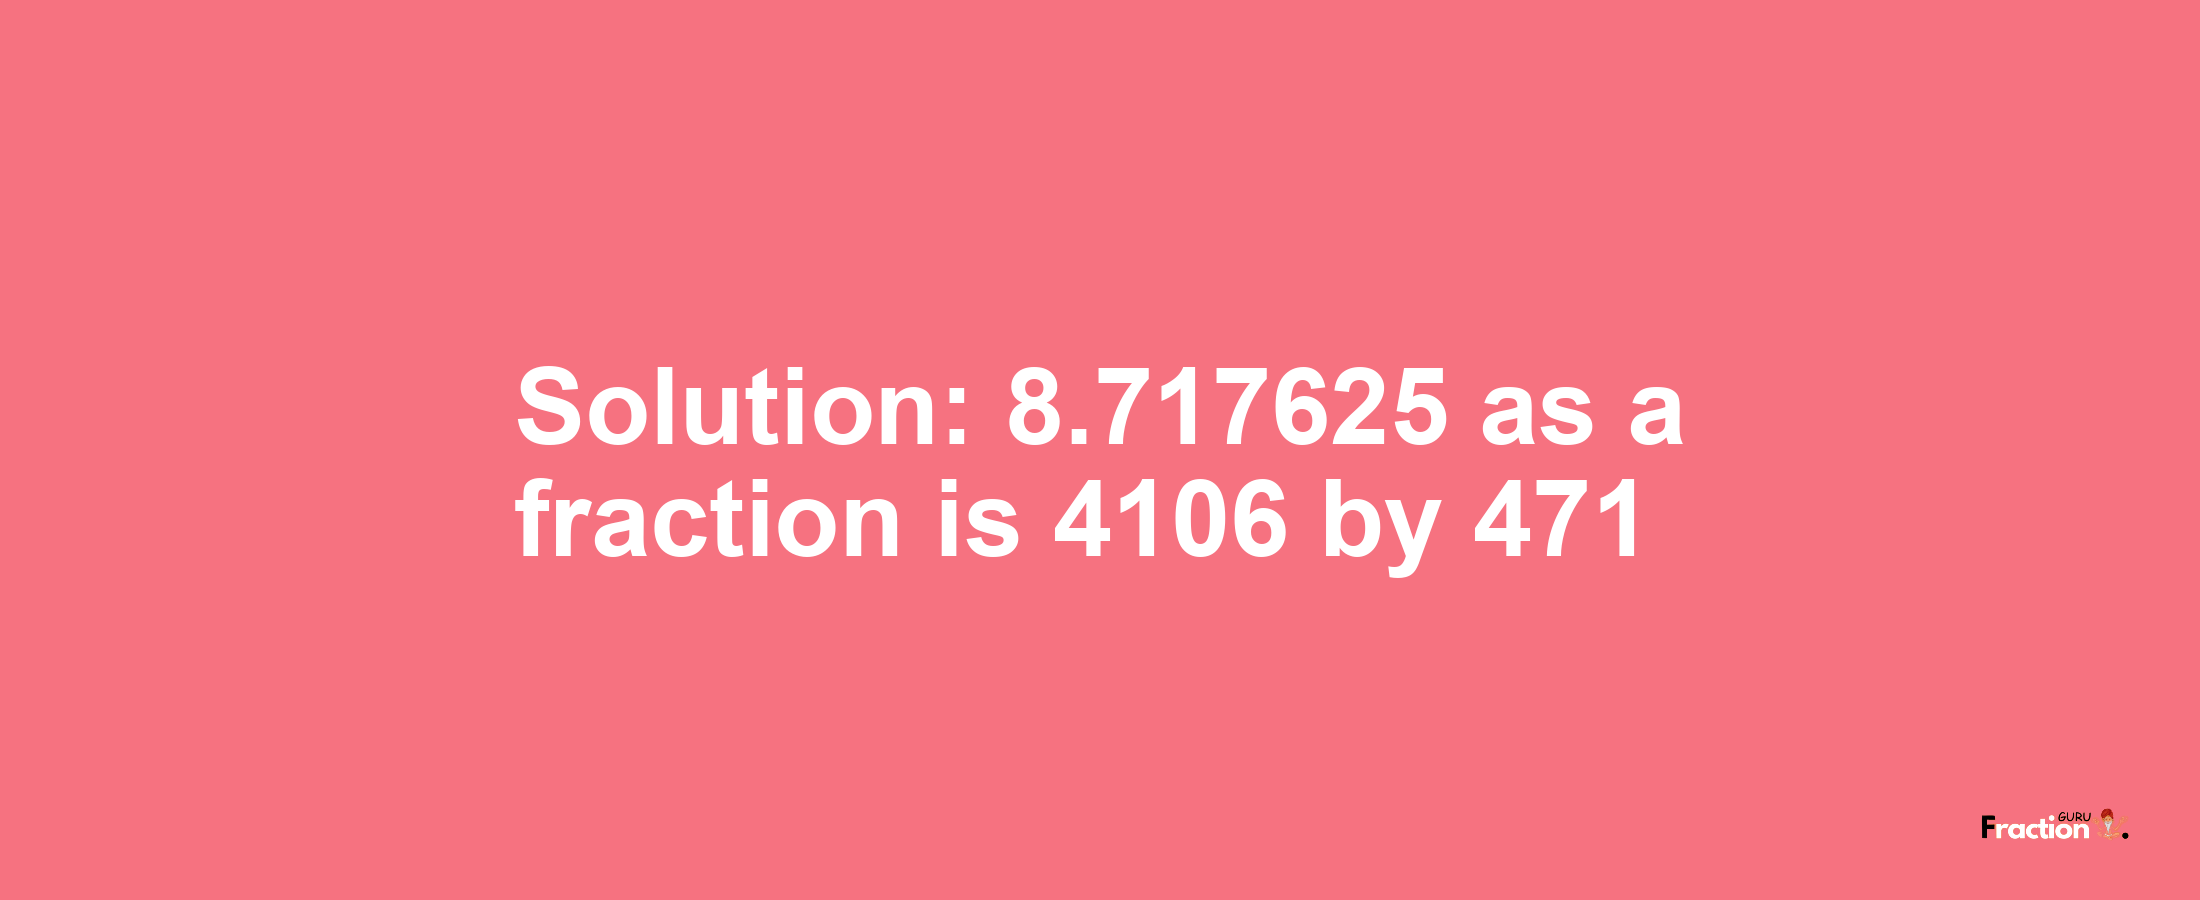 Solution:8.717625 as a fraction is 4106/471